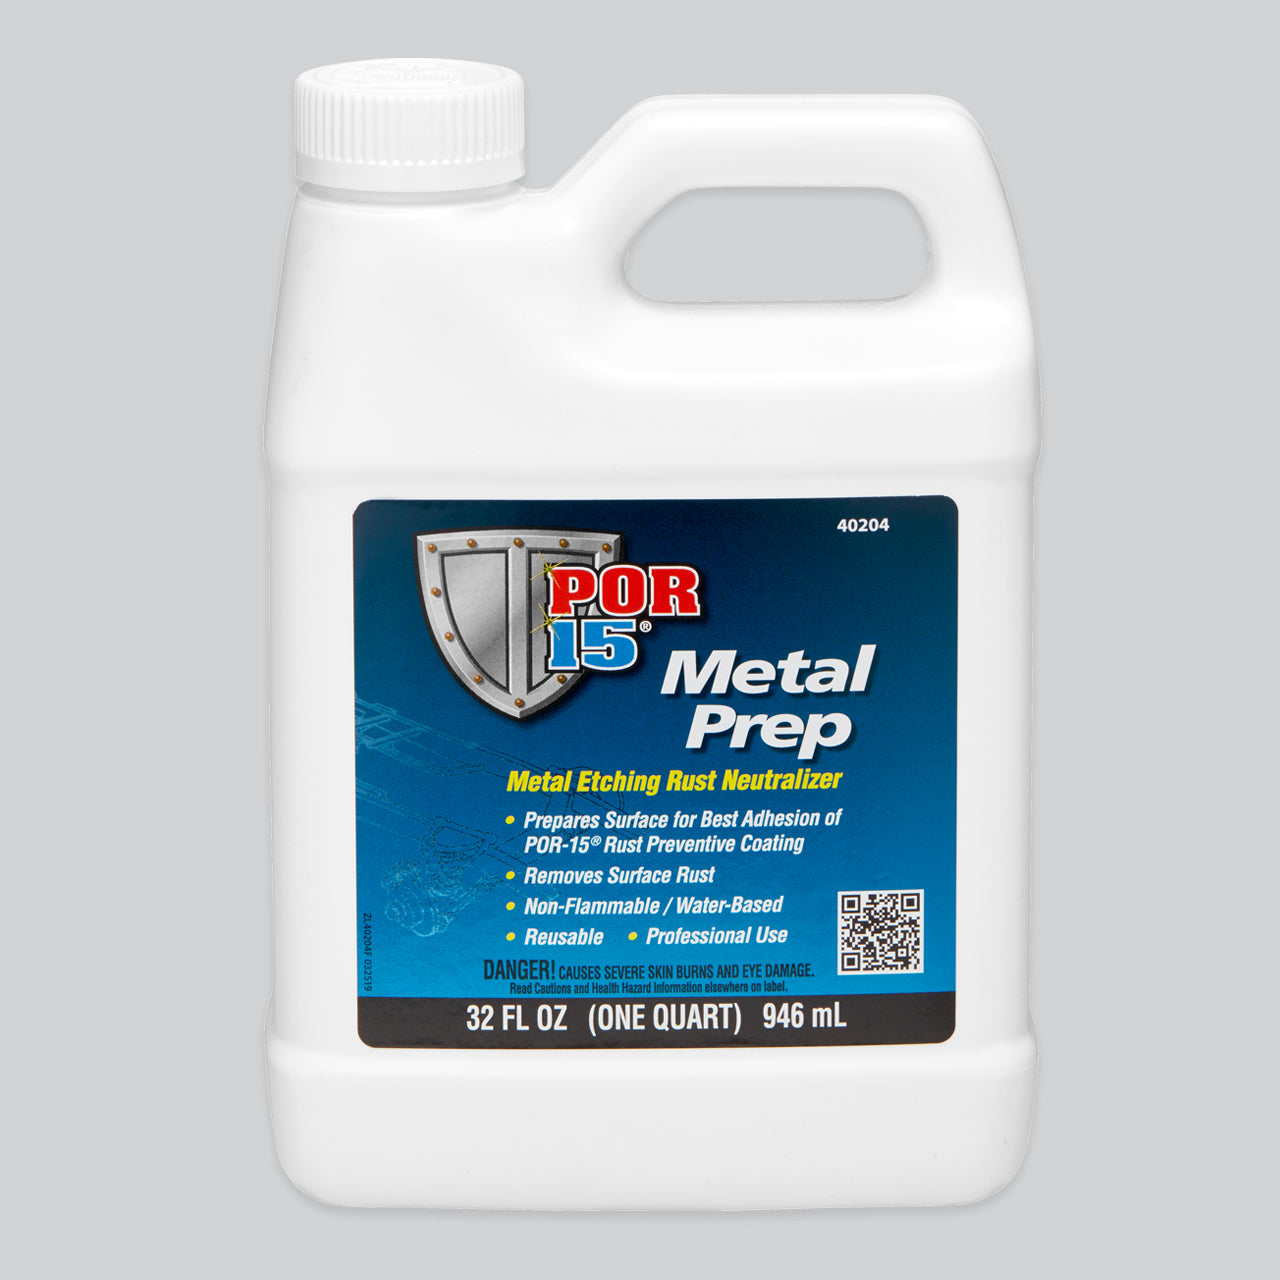 POR-15 Rust Preventive Paint, Stop Rust and Corrosion Permanently,  Anti-rust, Non-porous Protective Barrier, 32 Fluid Ounces, Gloss Black